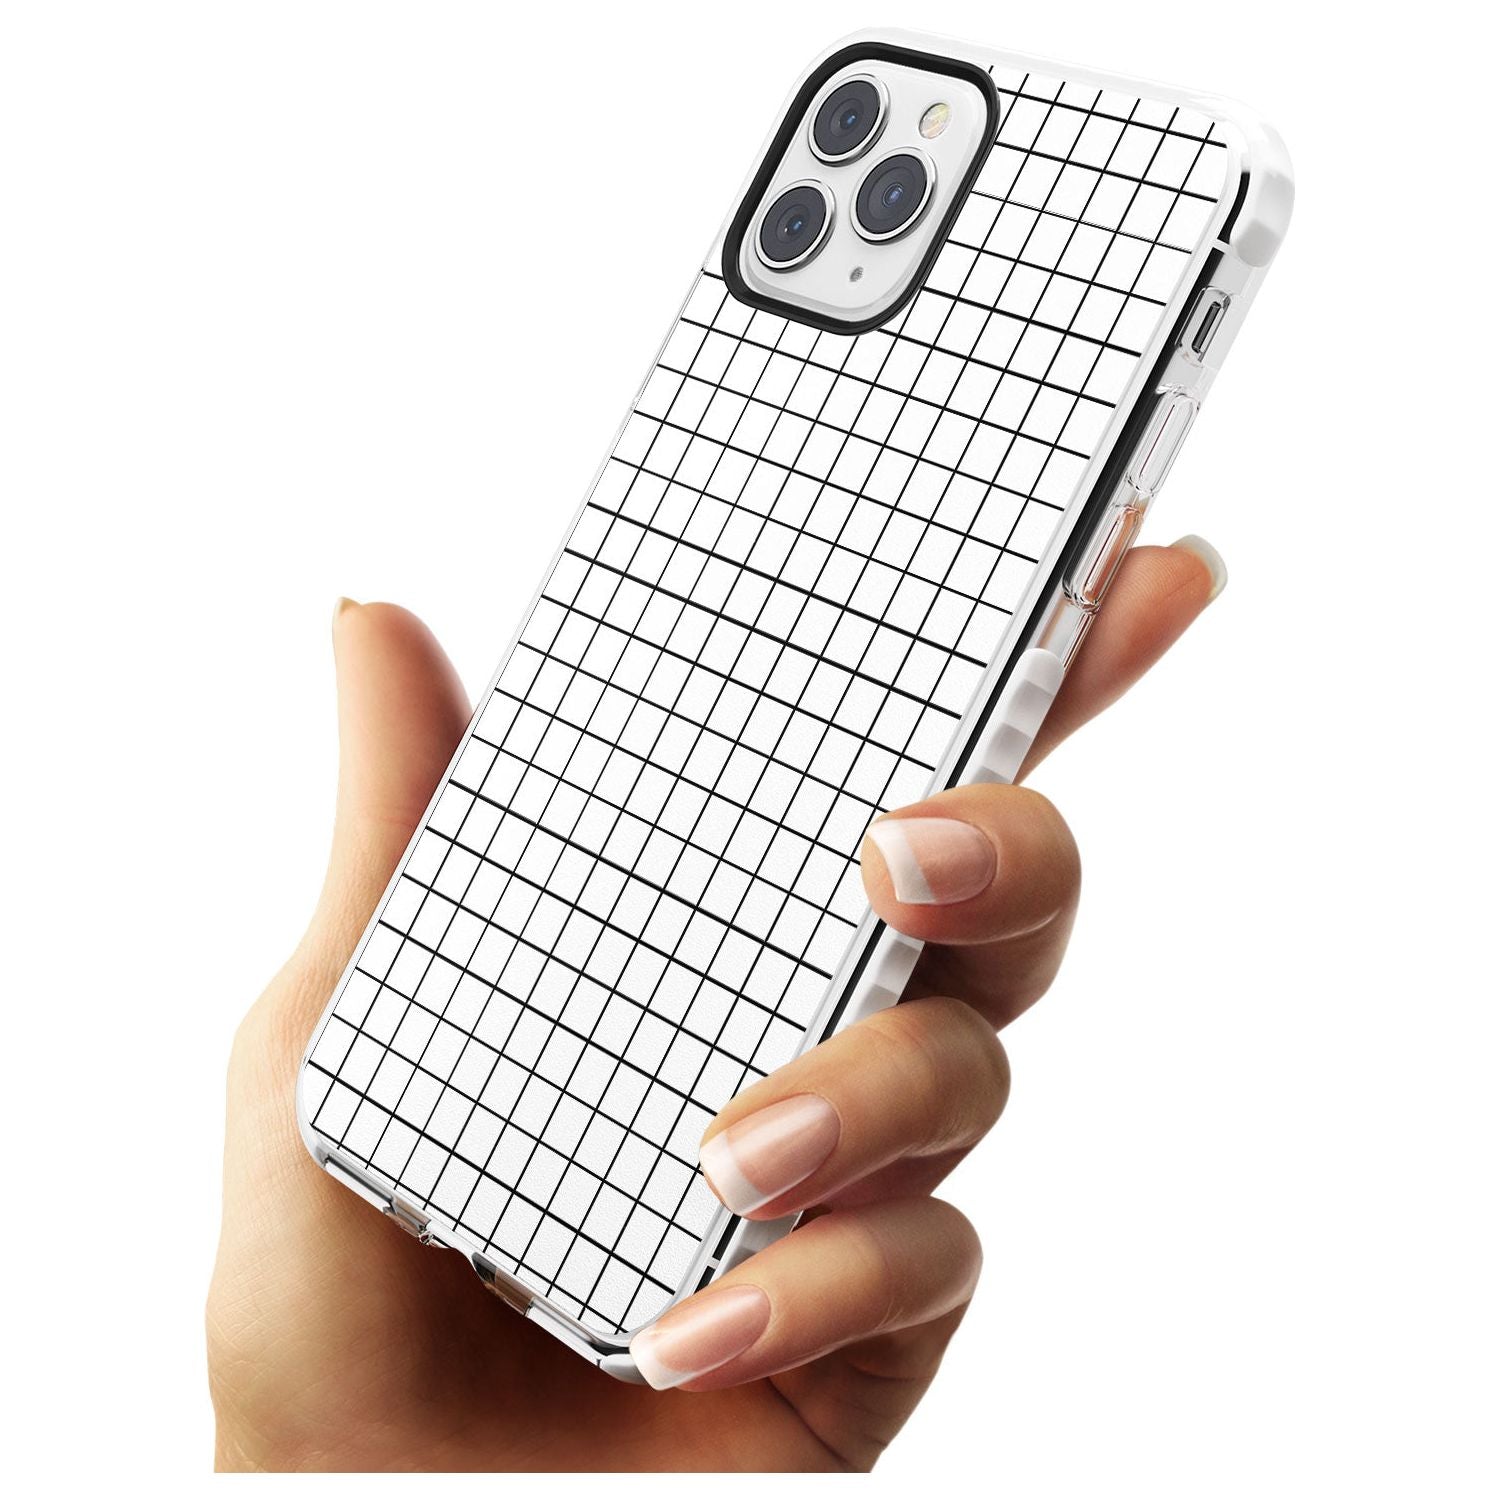 Simplistic Small Grid Designs White Impact Phone Case for iPhone 11 Pro Max